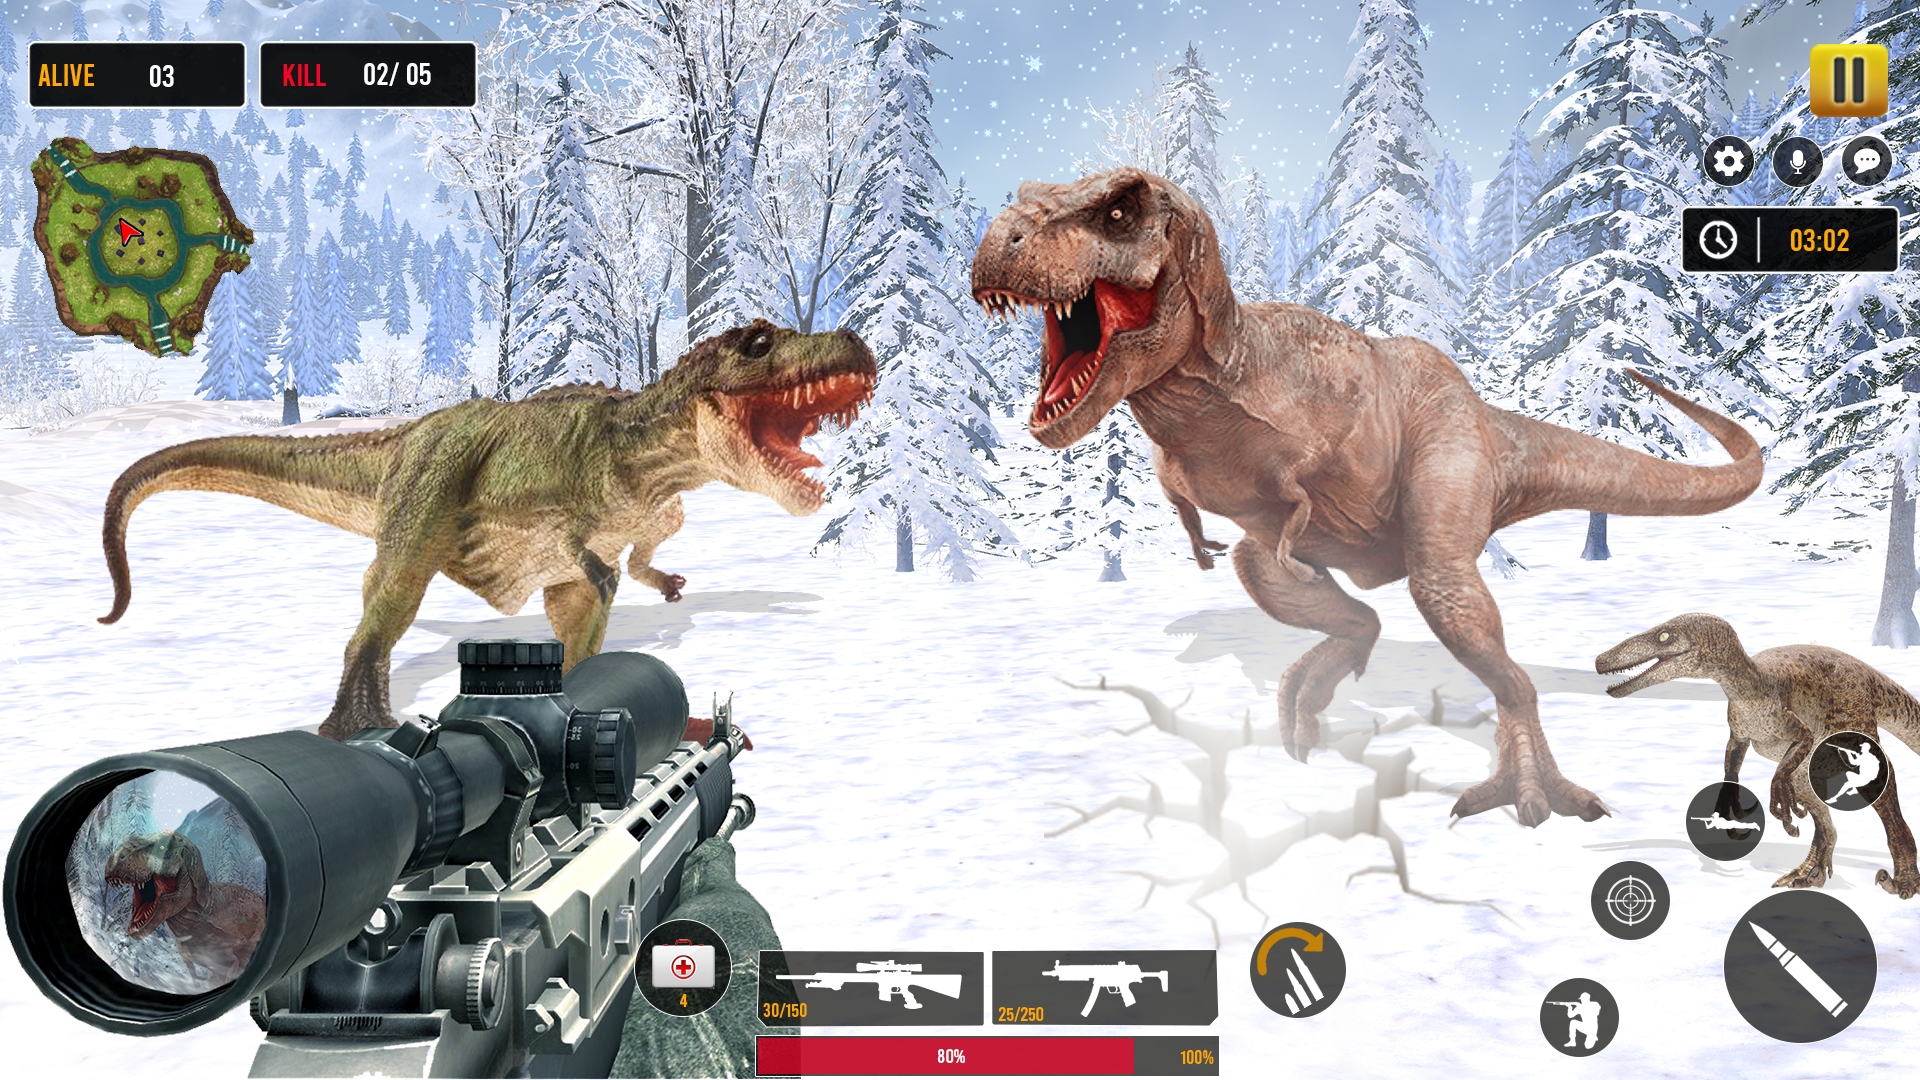 Deadly Dinosaur Hunting Game